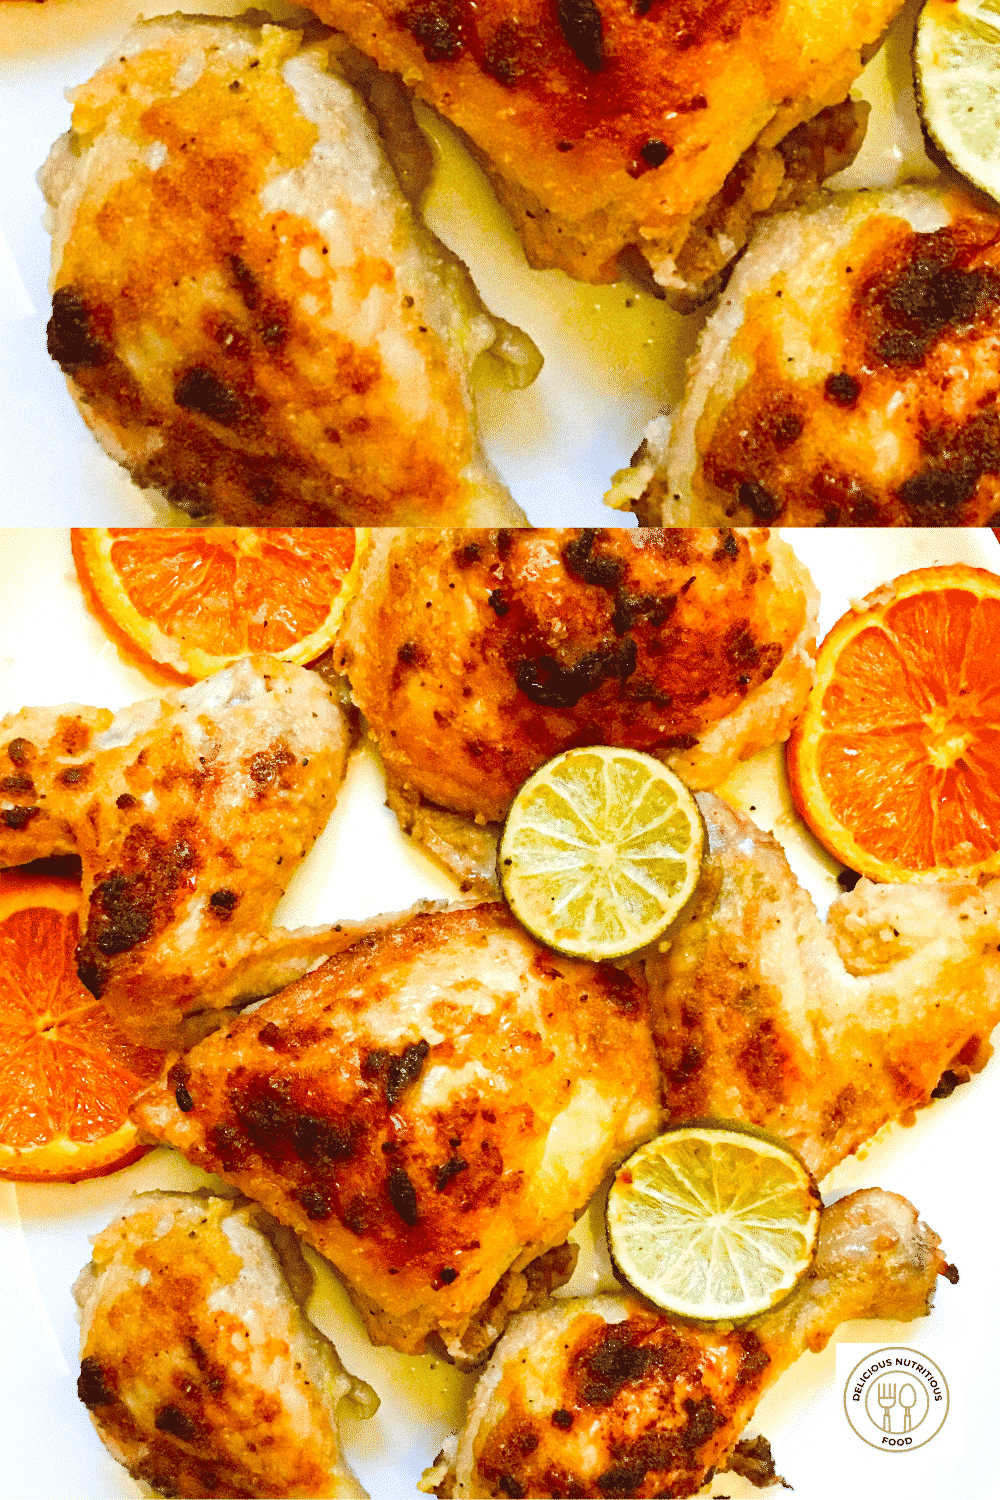 Whole chicken cut in 8 pieces marinated in lime and orange juice baked on a sheet pan ready to serve. Two pictures fused.